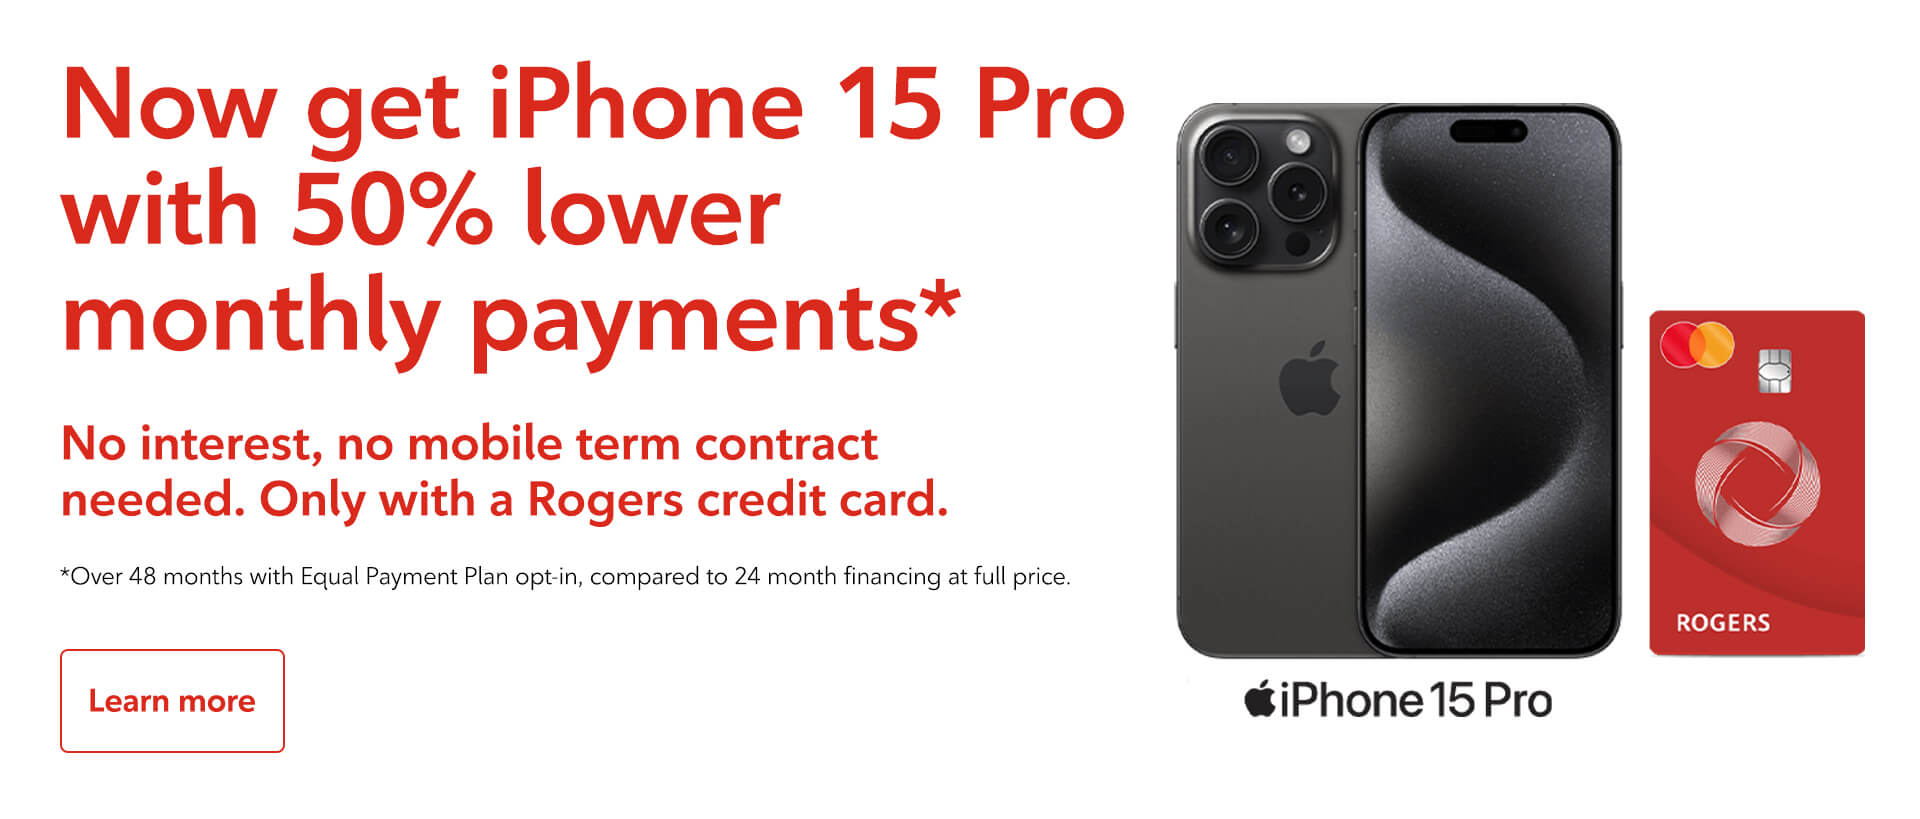 iPhone 15 Pro with Rogers credit card